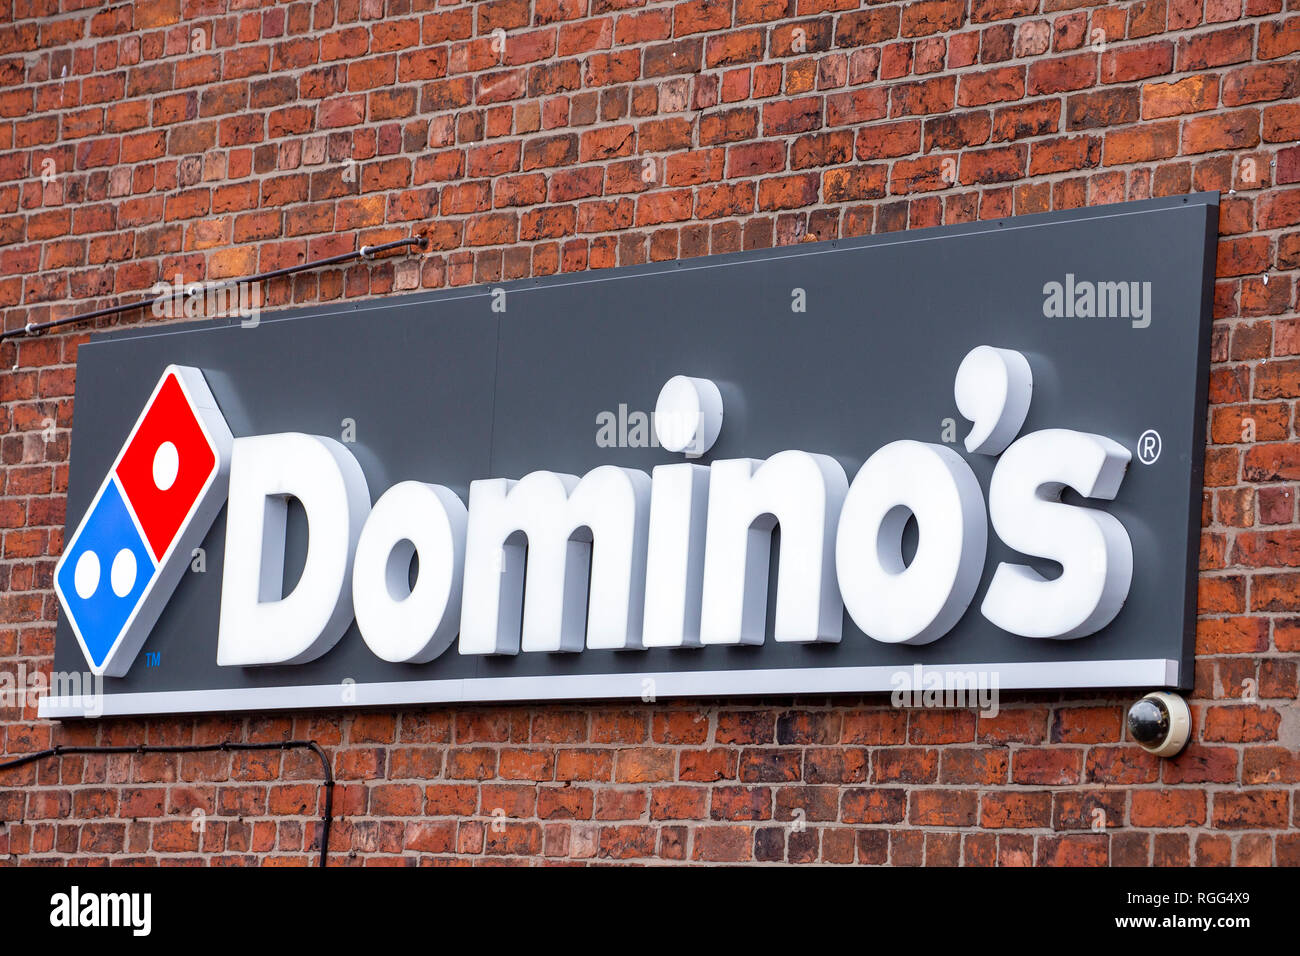 Domino's pizza sign on outside wall UK Stock Photo